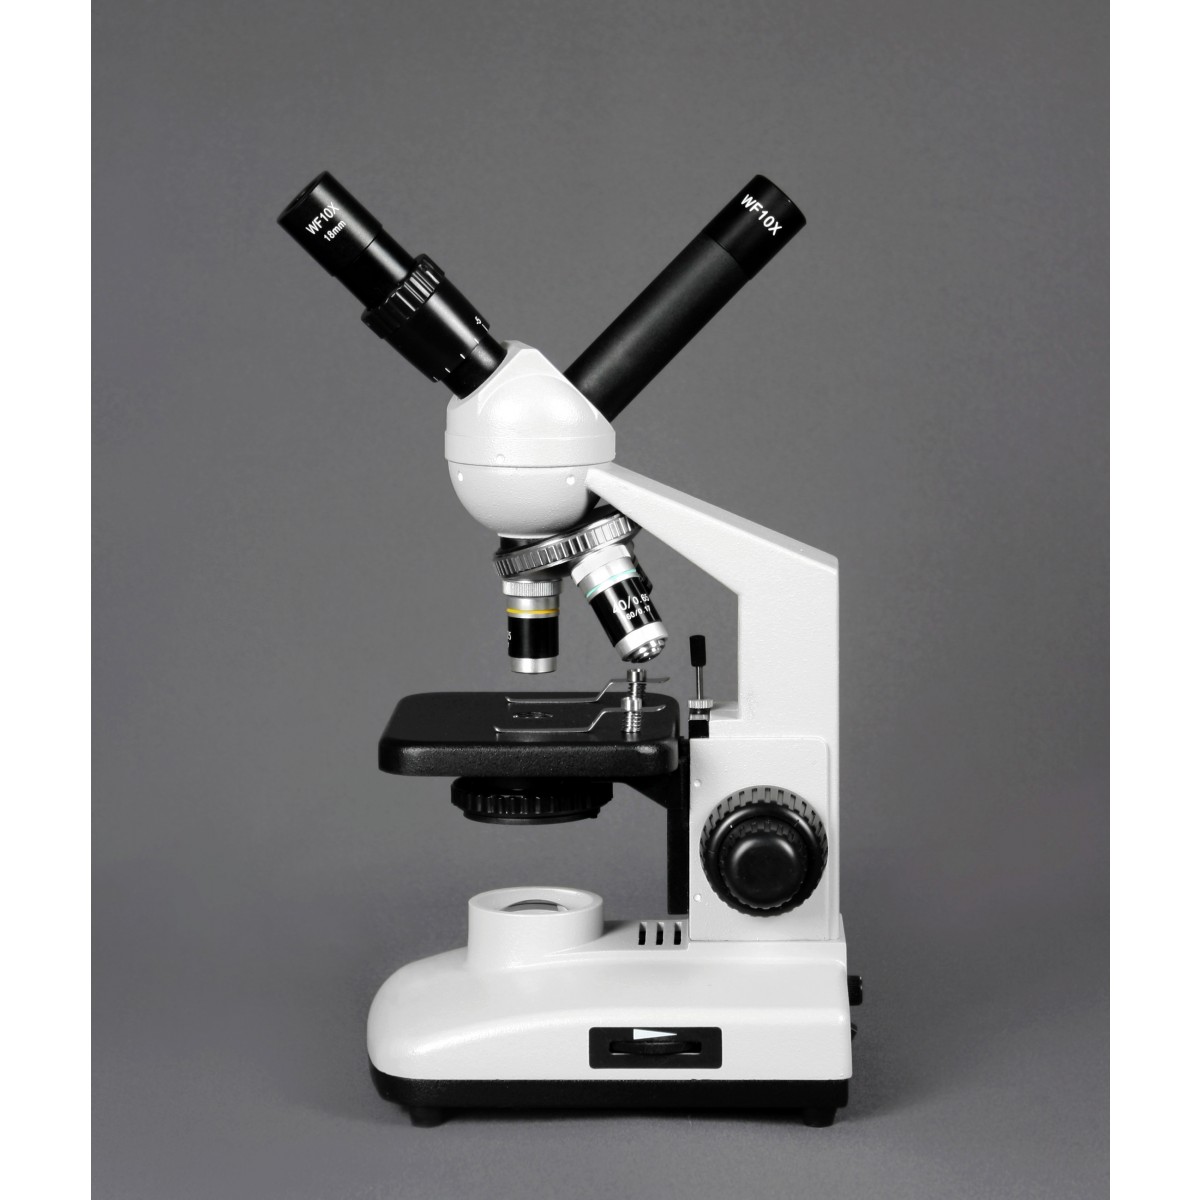 Gliding Round Stage 40x-1000x Magnification LED Illumination 10x WF & 25x WF Eyepiece Vision Scientific VME0018-T-LD-2NS Dual View Elementary Level Compound Microscope 2 MP Digital Camera 